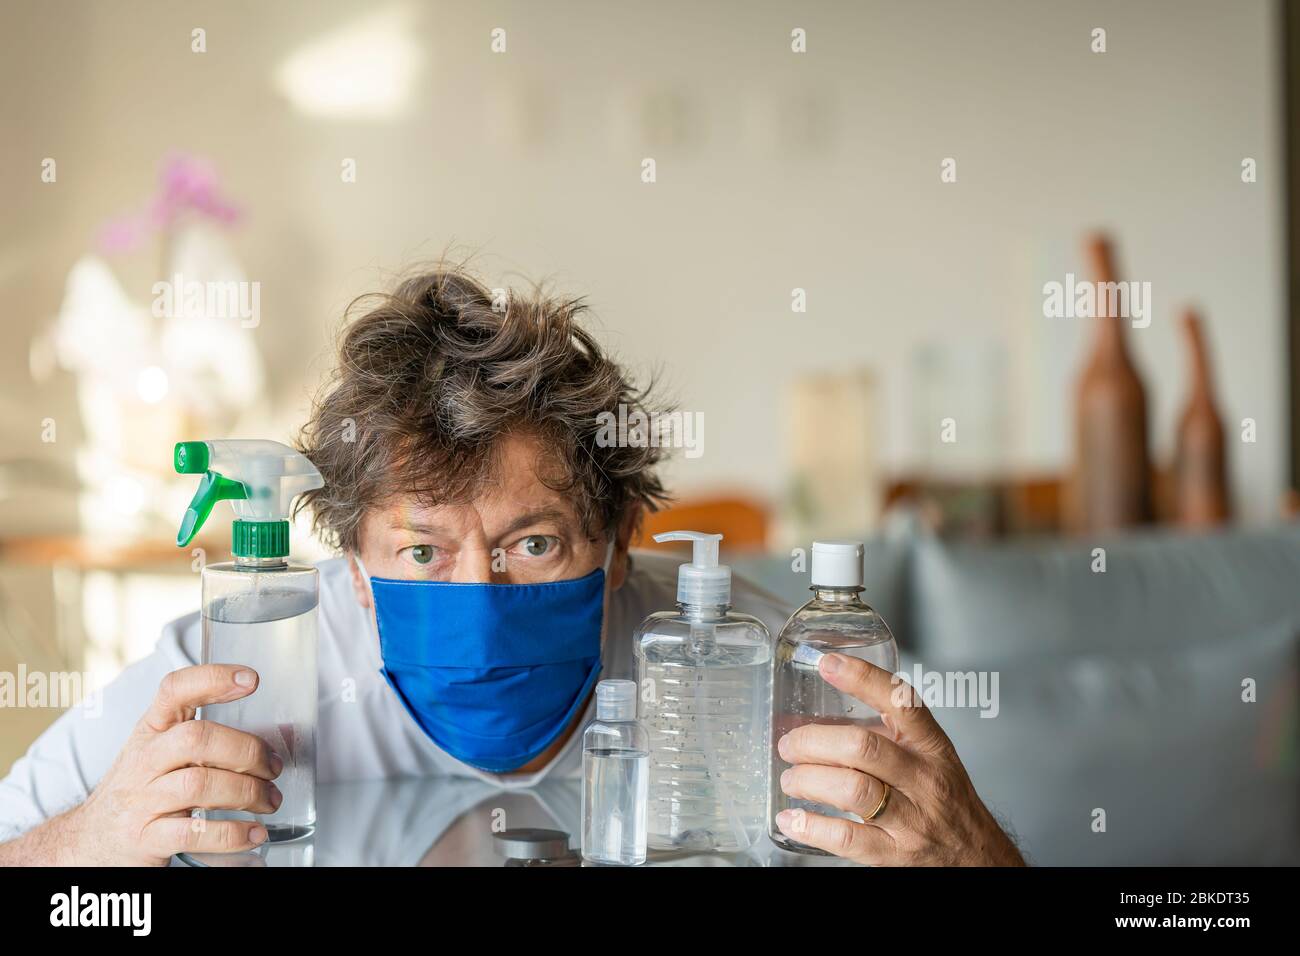 Virus picture, Germs, Coronavirus disinfectants, Covid-19 disinfectants, Spraying alcohol to kill coronavirus or COVID-19, virus and COVID-19 concept. Stock Photo